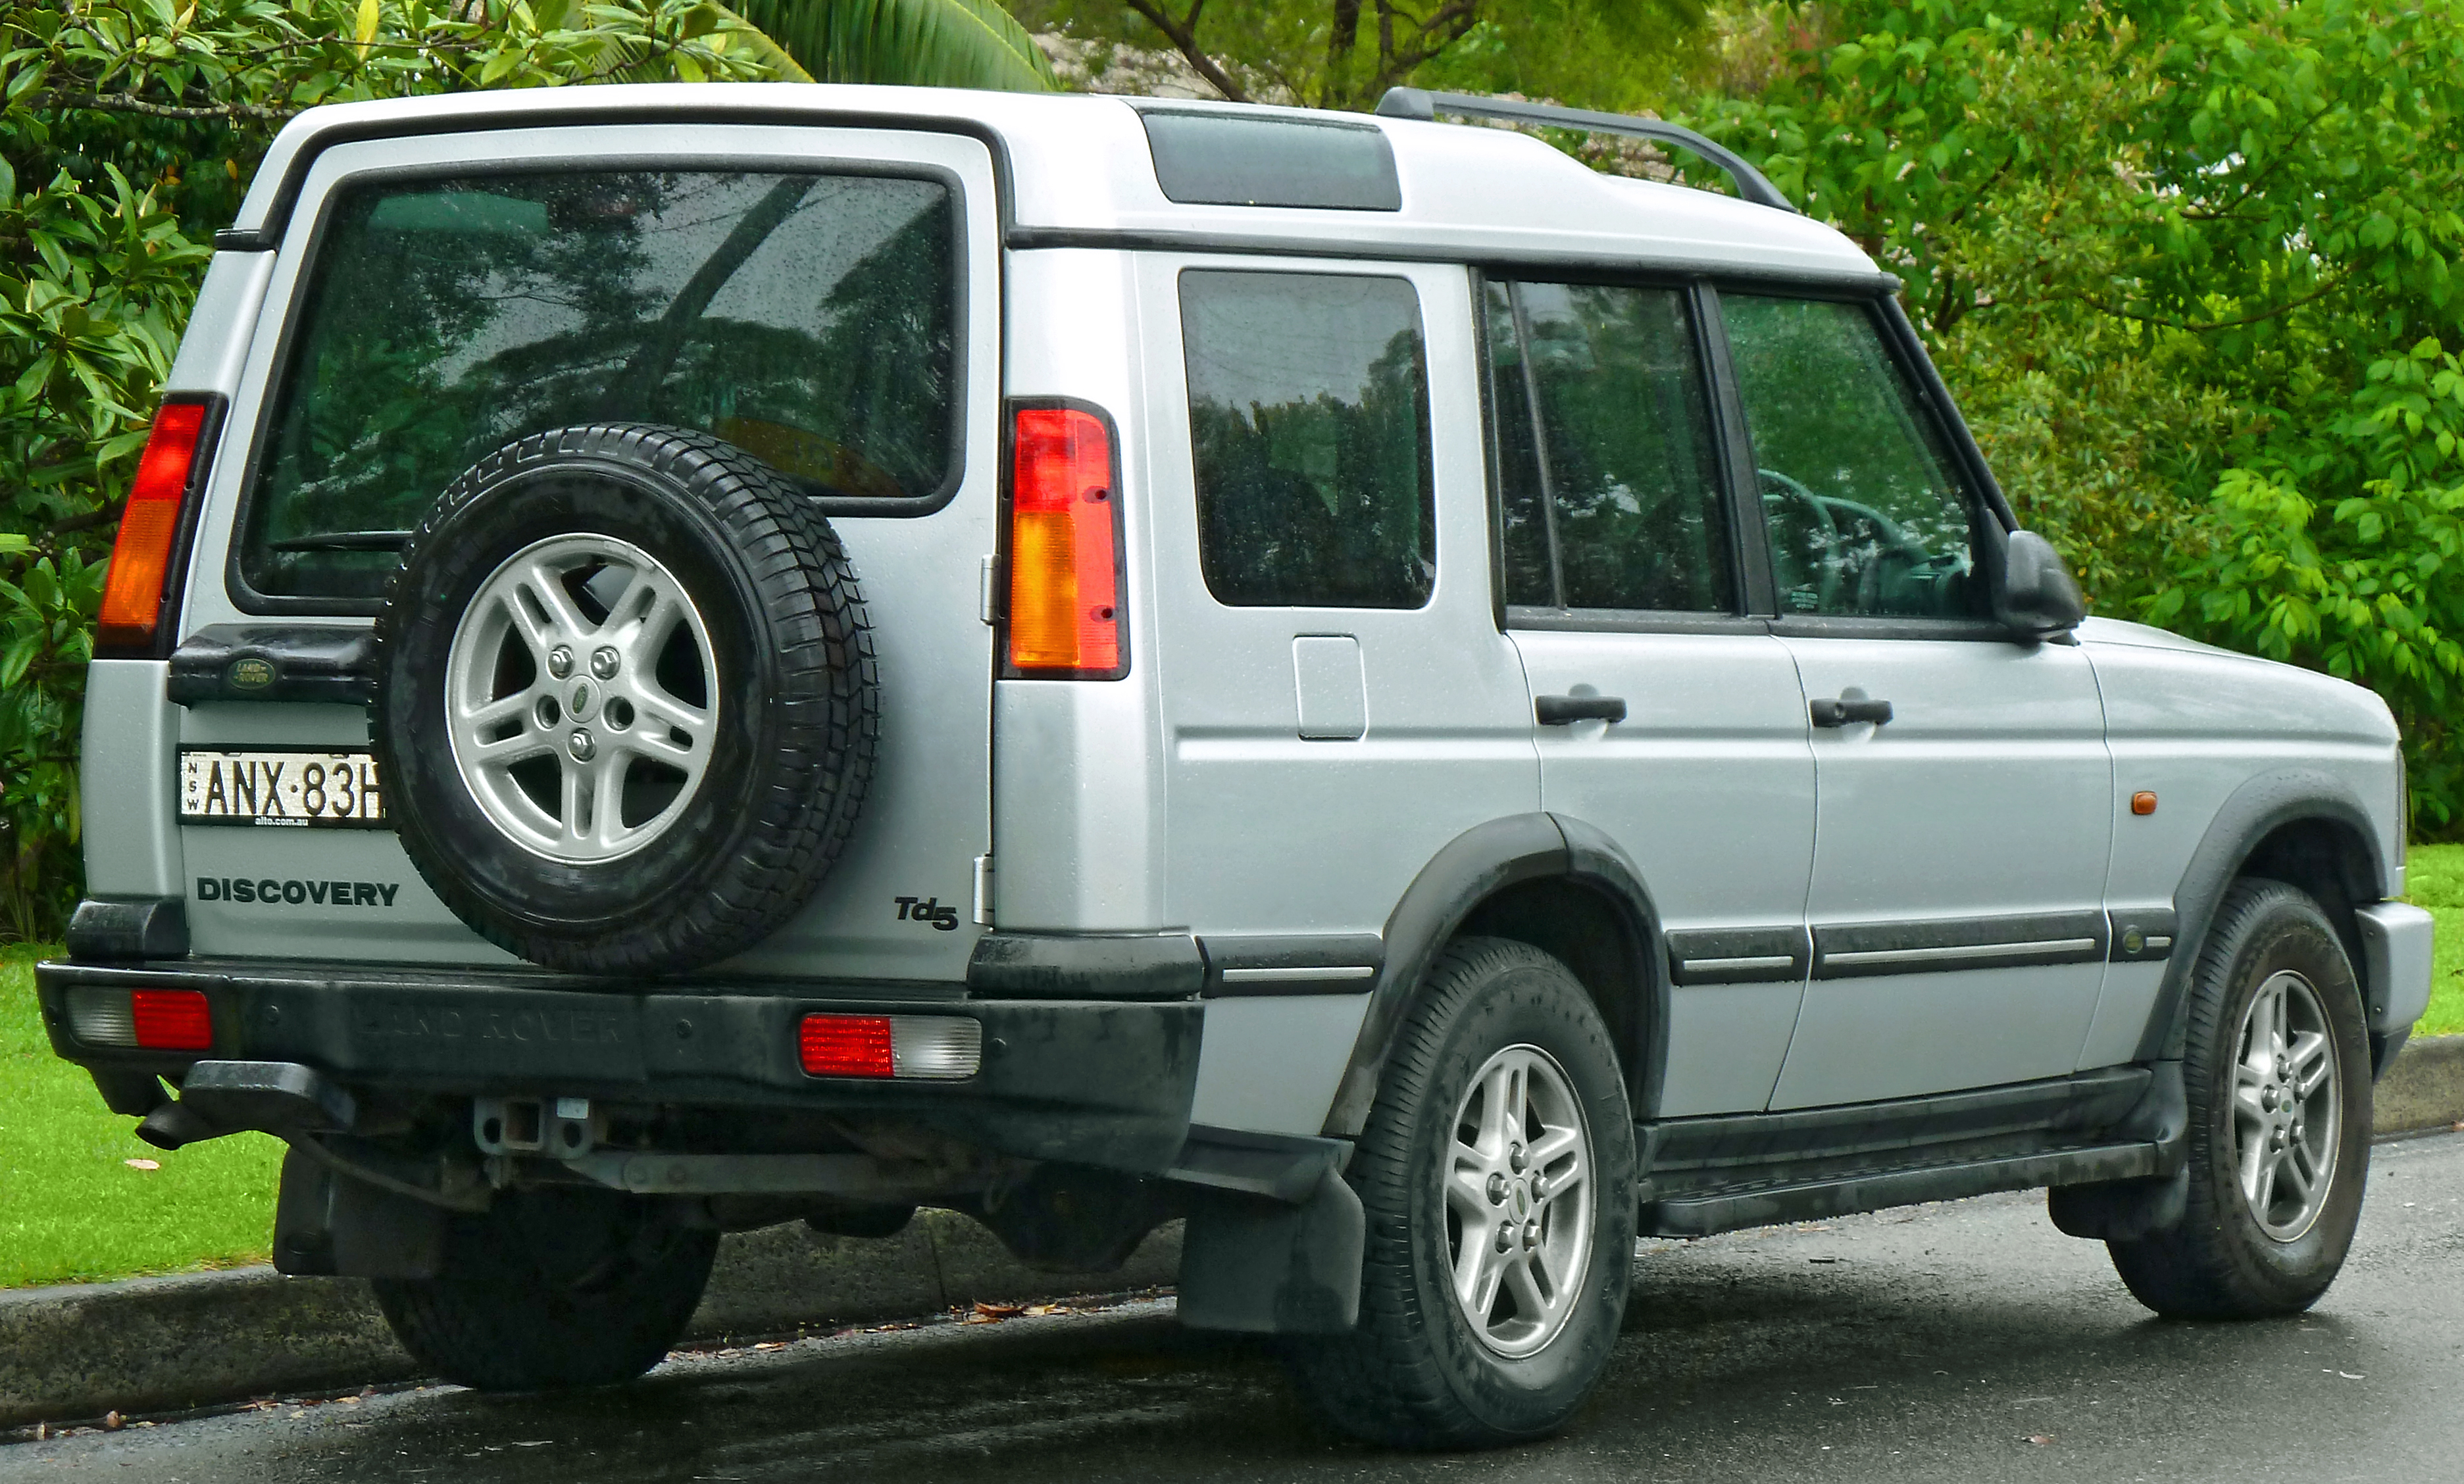 File:2002-2004 Rover Discovery (MY03) 5-door wagon (2011-10-25).jpg - Wikimedia Commons